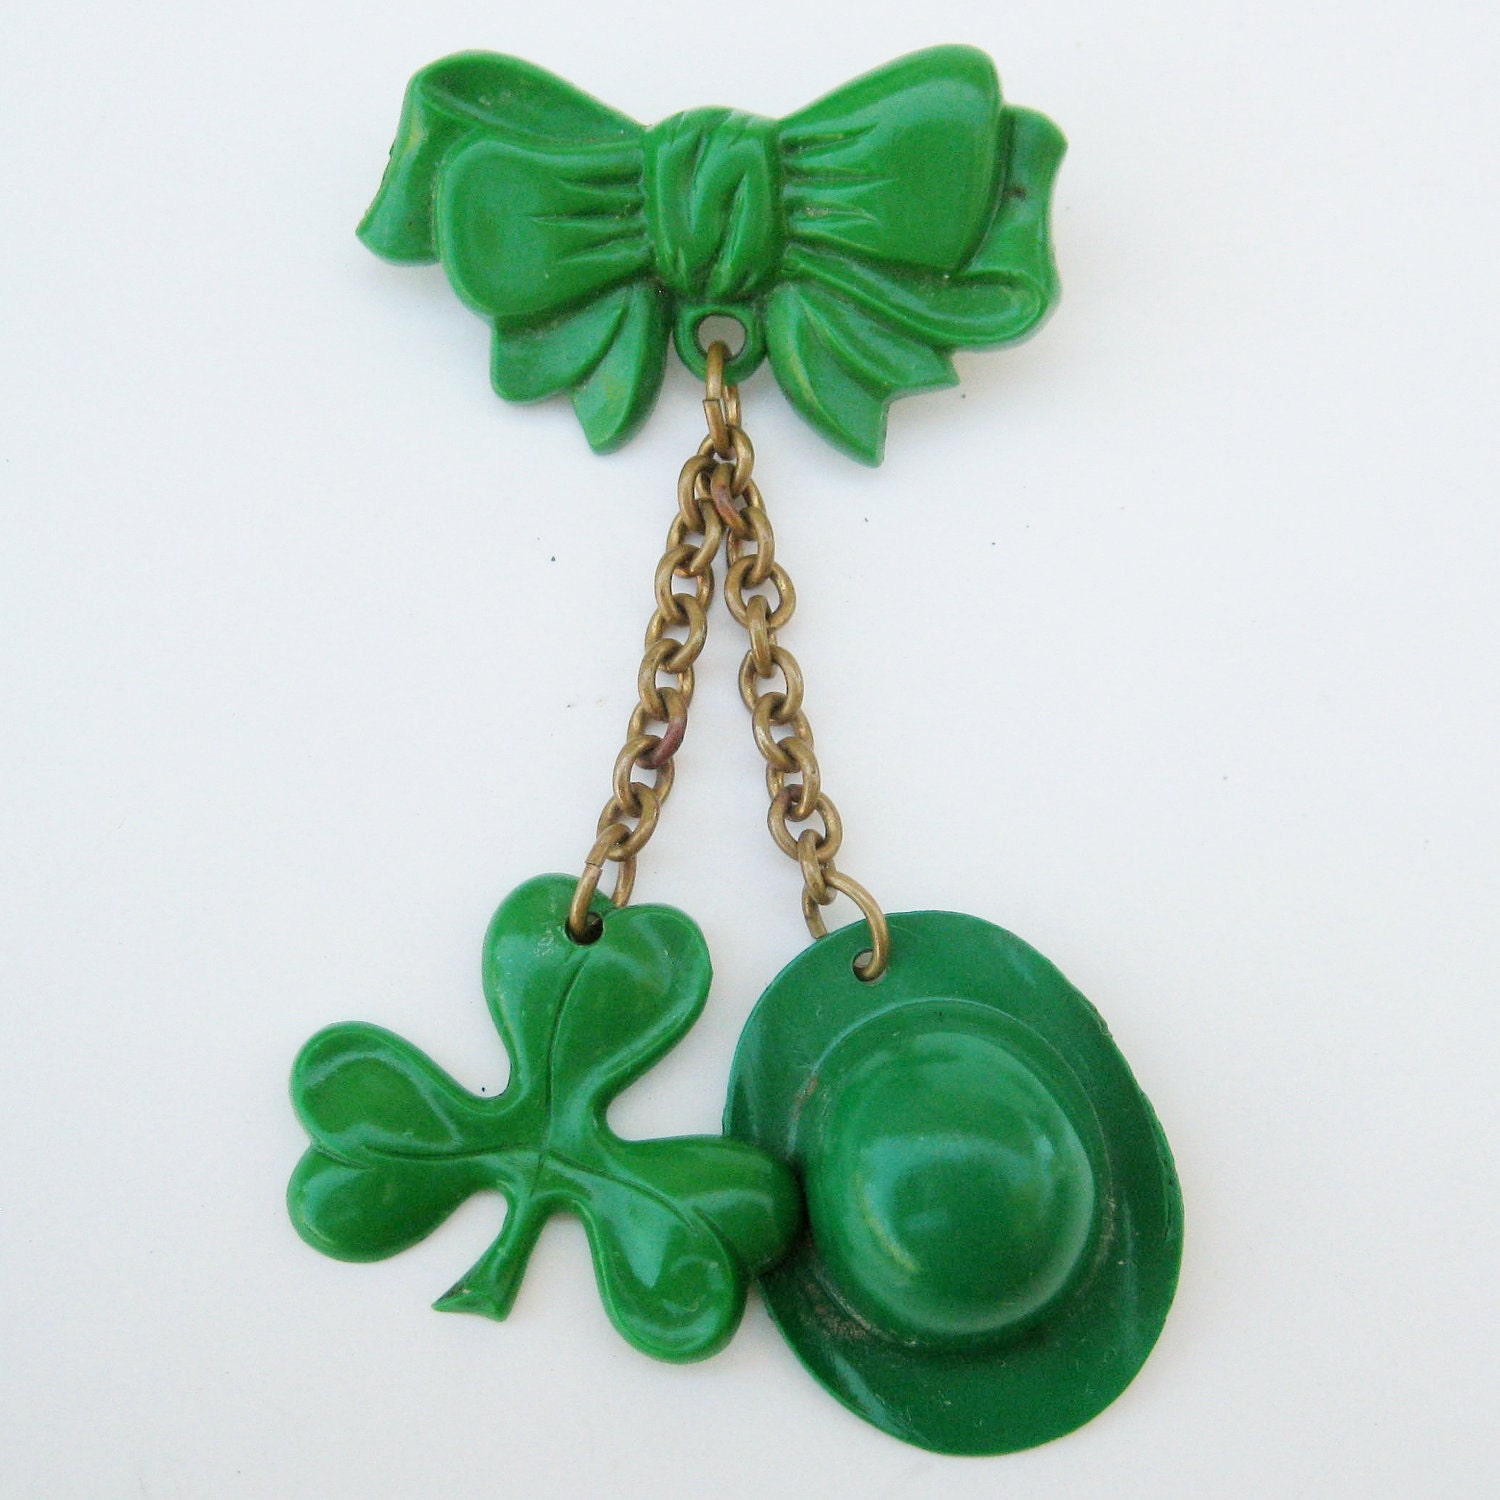 Vintage 30s 40s Luck of the Irish Green Celluloid St. Patricks Day Good Luck Charm Bow Pin Brooch